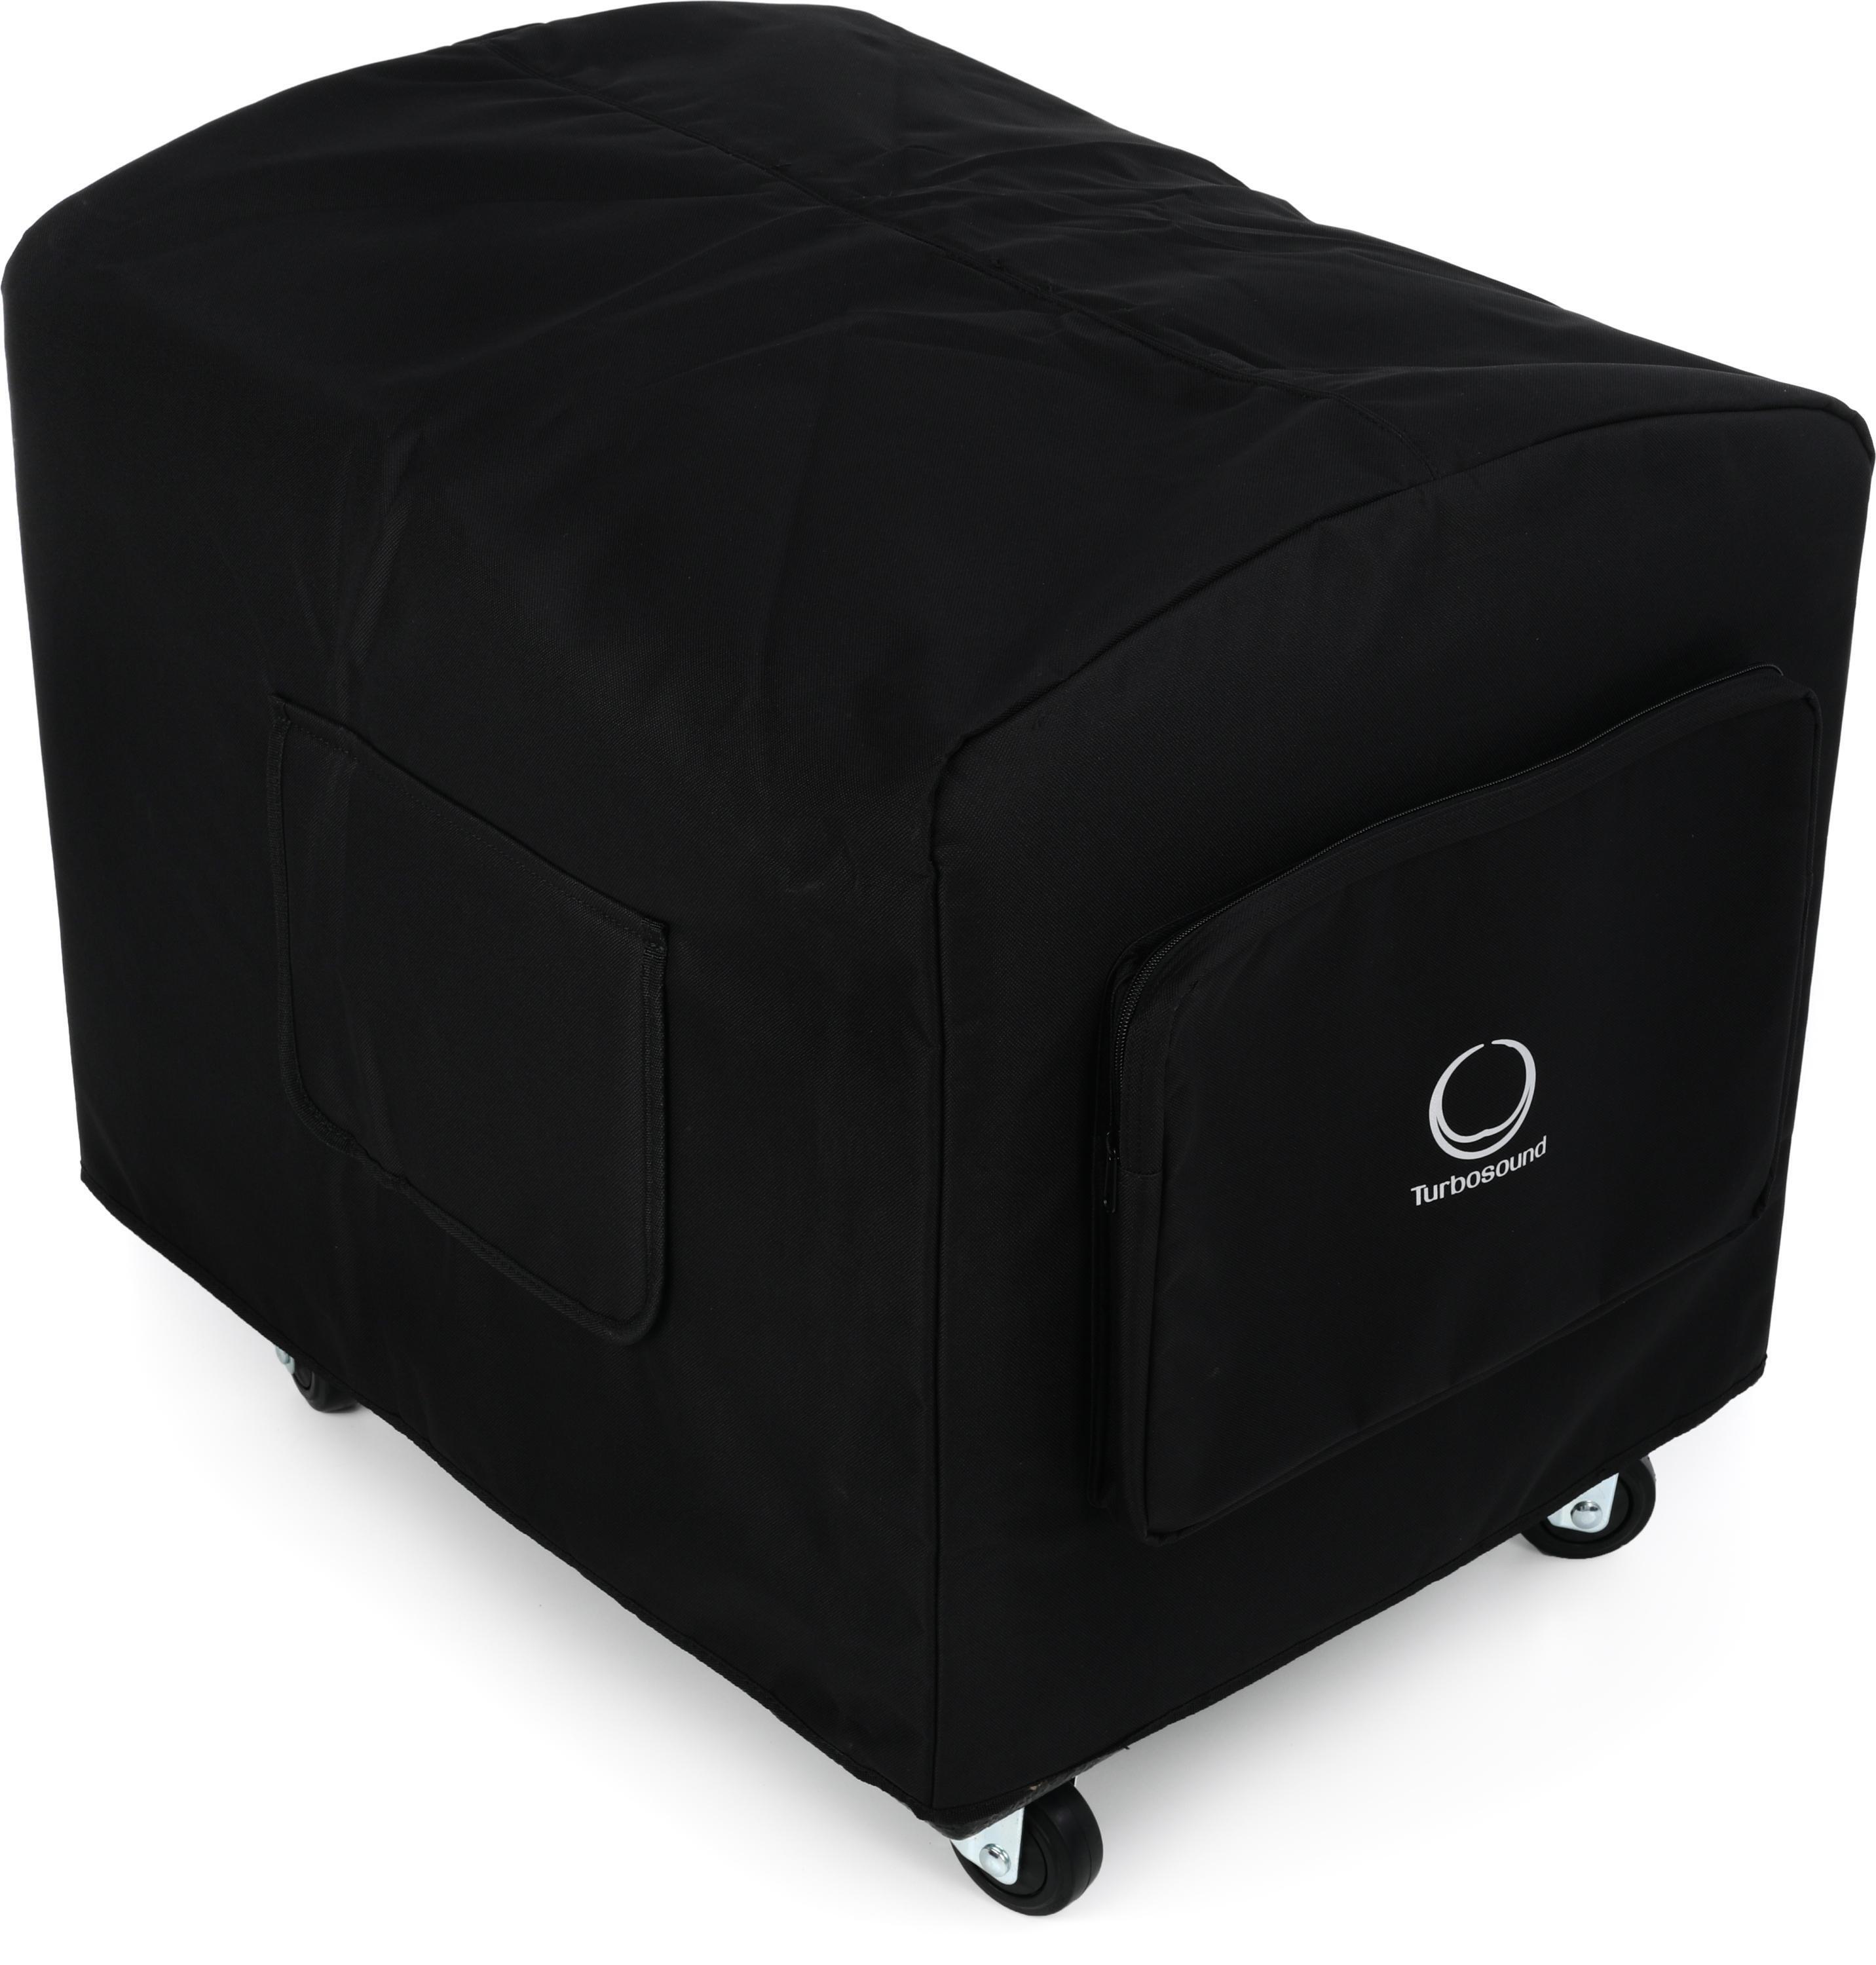 Bundled Item: Turbosound TS-PC18B-4 Deluxe Water-resistant Cover for 18" Subwoofers with Casters